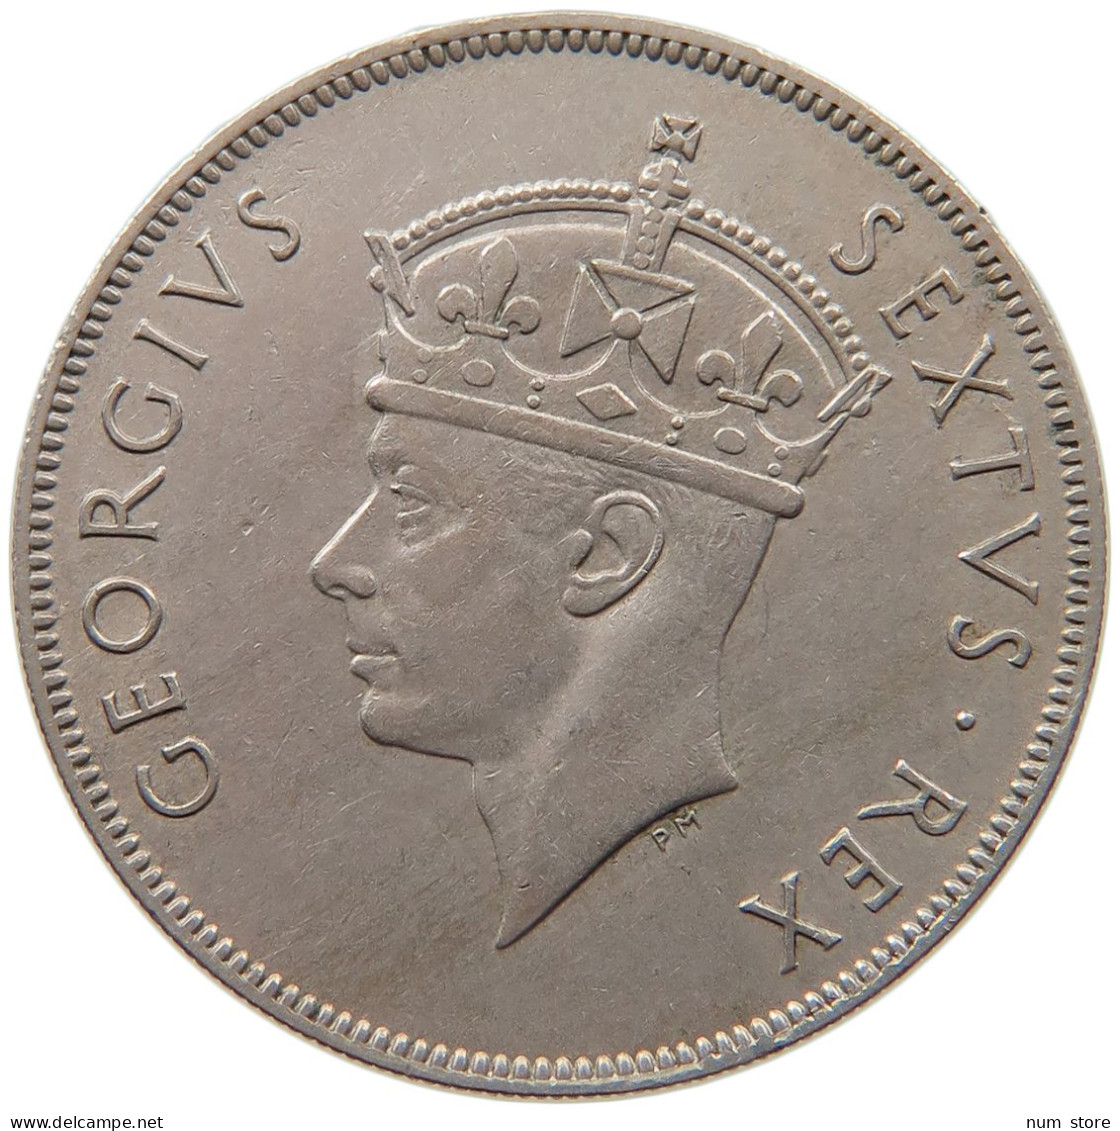 EAST AFRICA SHILLING 1952 #s090 0155 - British Colony